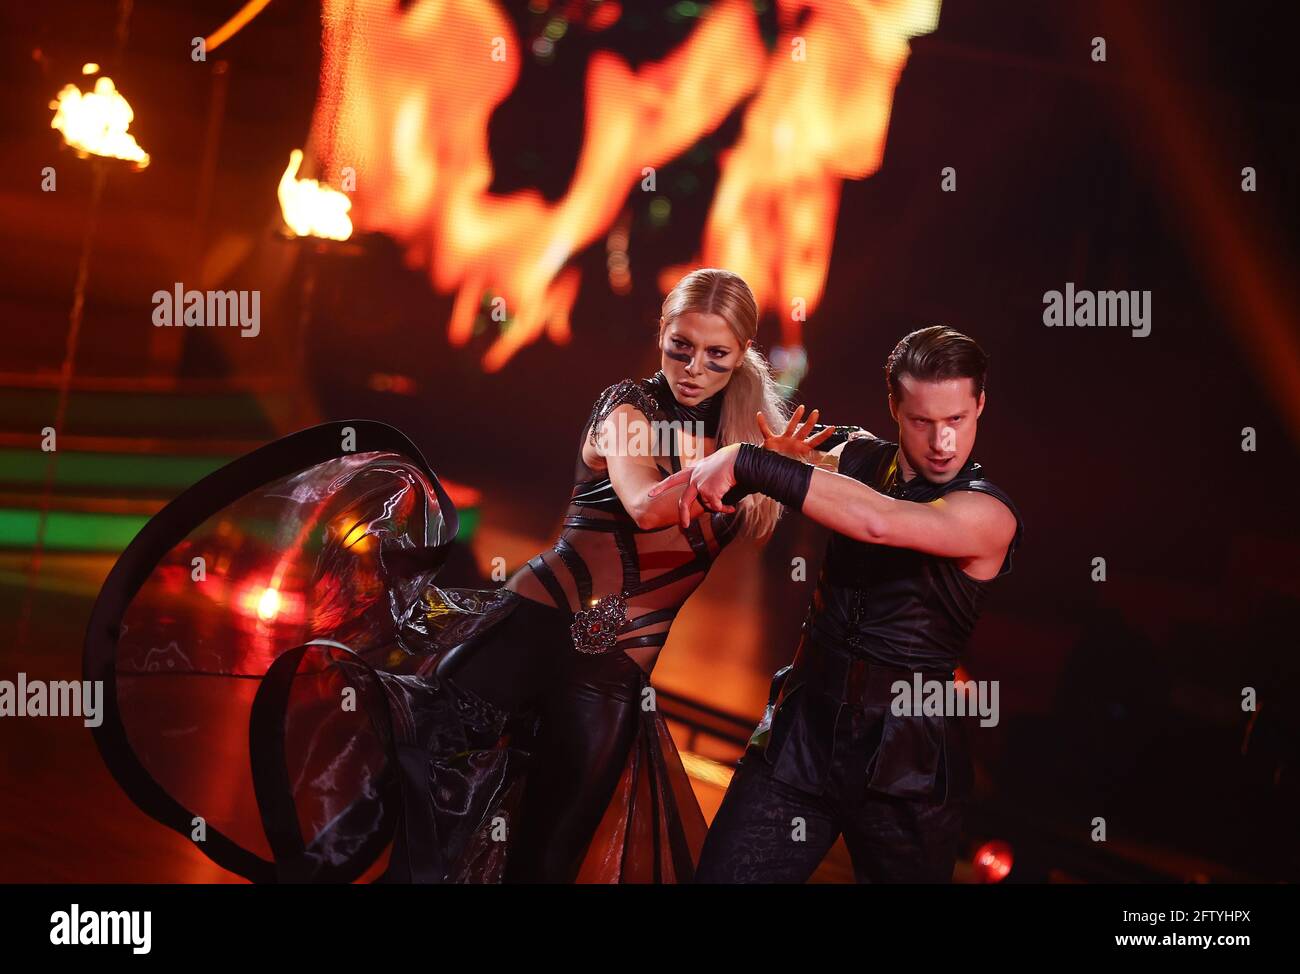 Cologne, Germany. 21st May, 2021. Actress Valentina Pahde and professional dancer Valentin Lusin dance a Paso Doble on the RTL dance show "Let's Dance". Credit: Rolf Vennenbernd/dpa-Pool/dpa/Alamy Live News Stock Photo